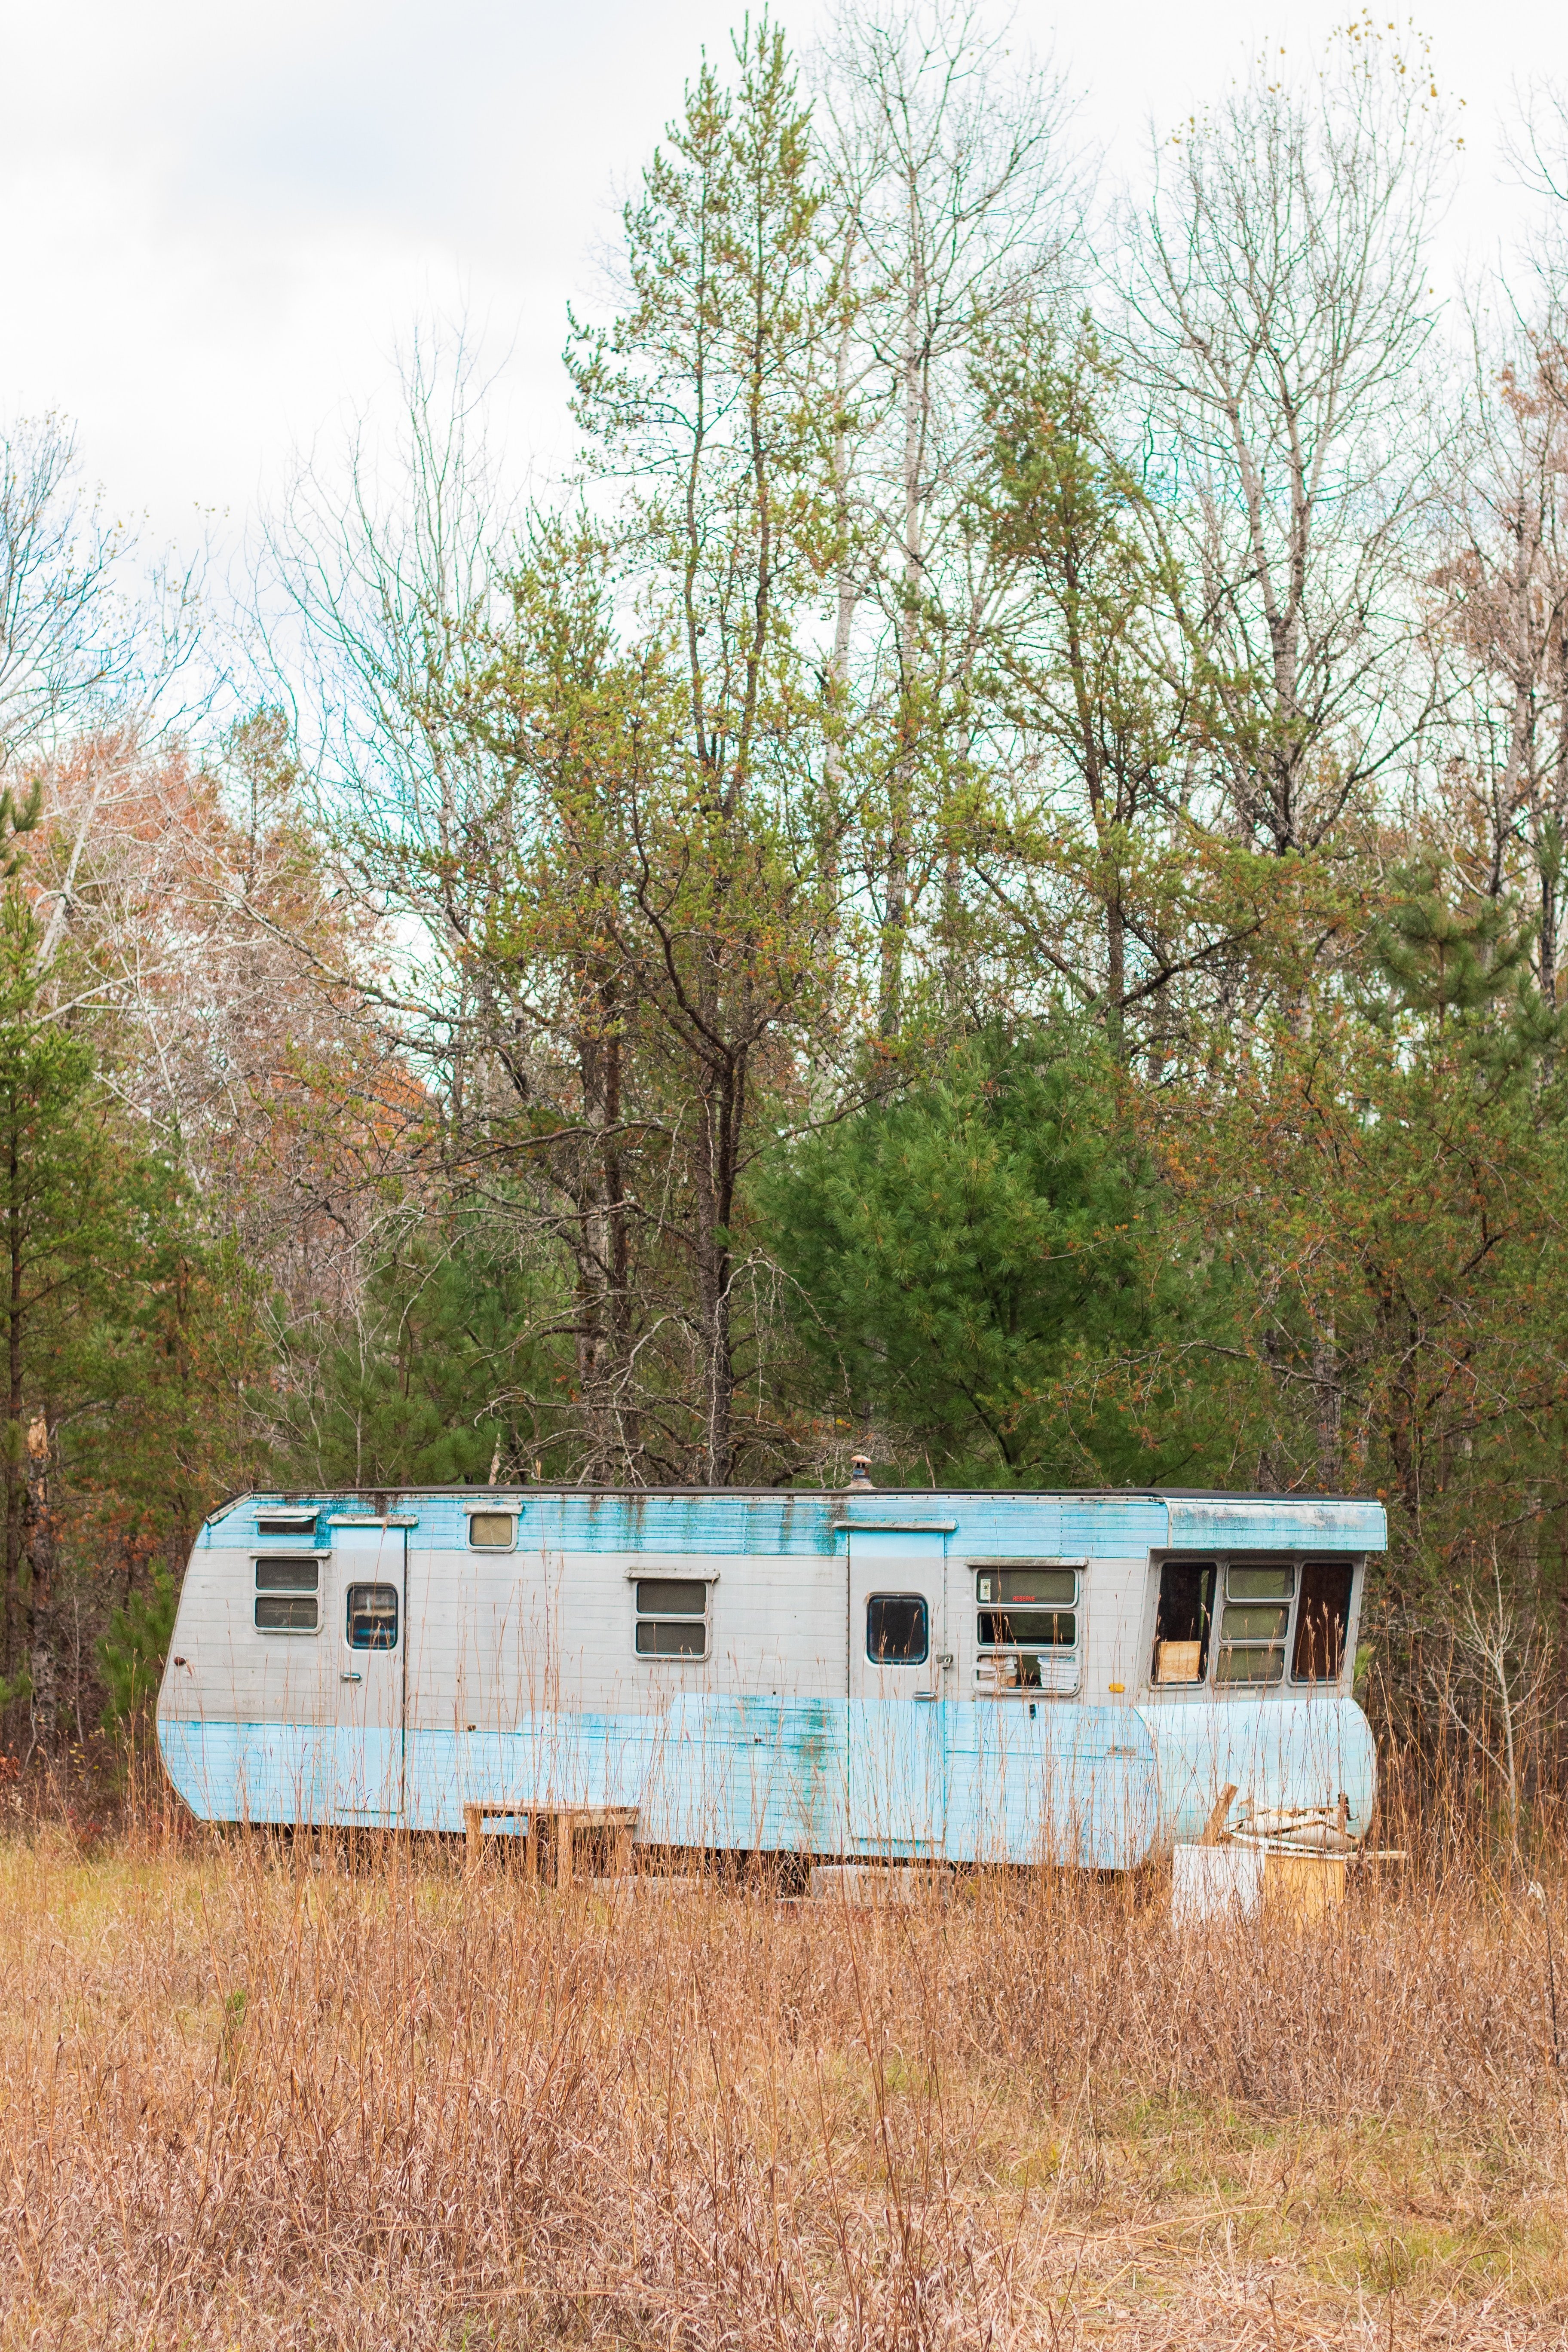 A mobile home in the woods | Source: Unsplash.com